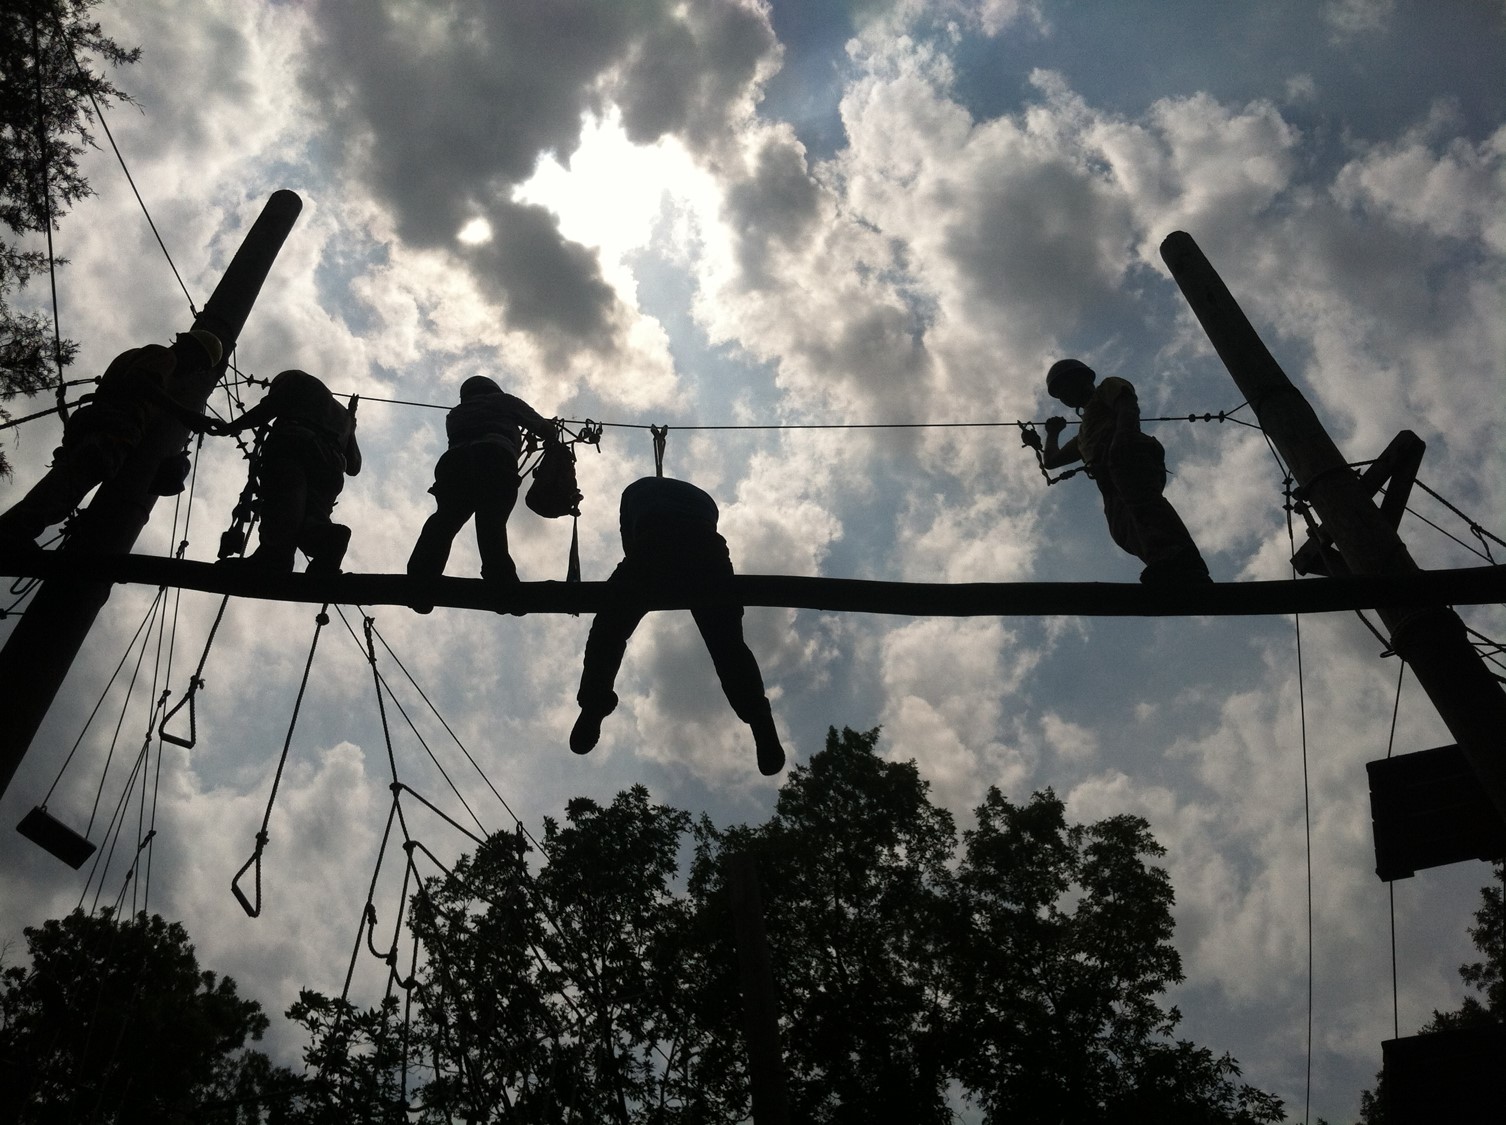 high-ropes course